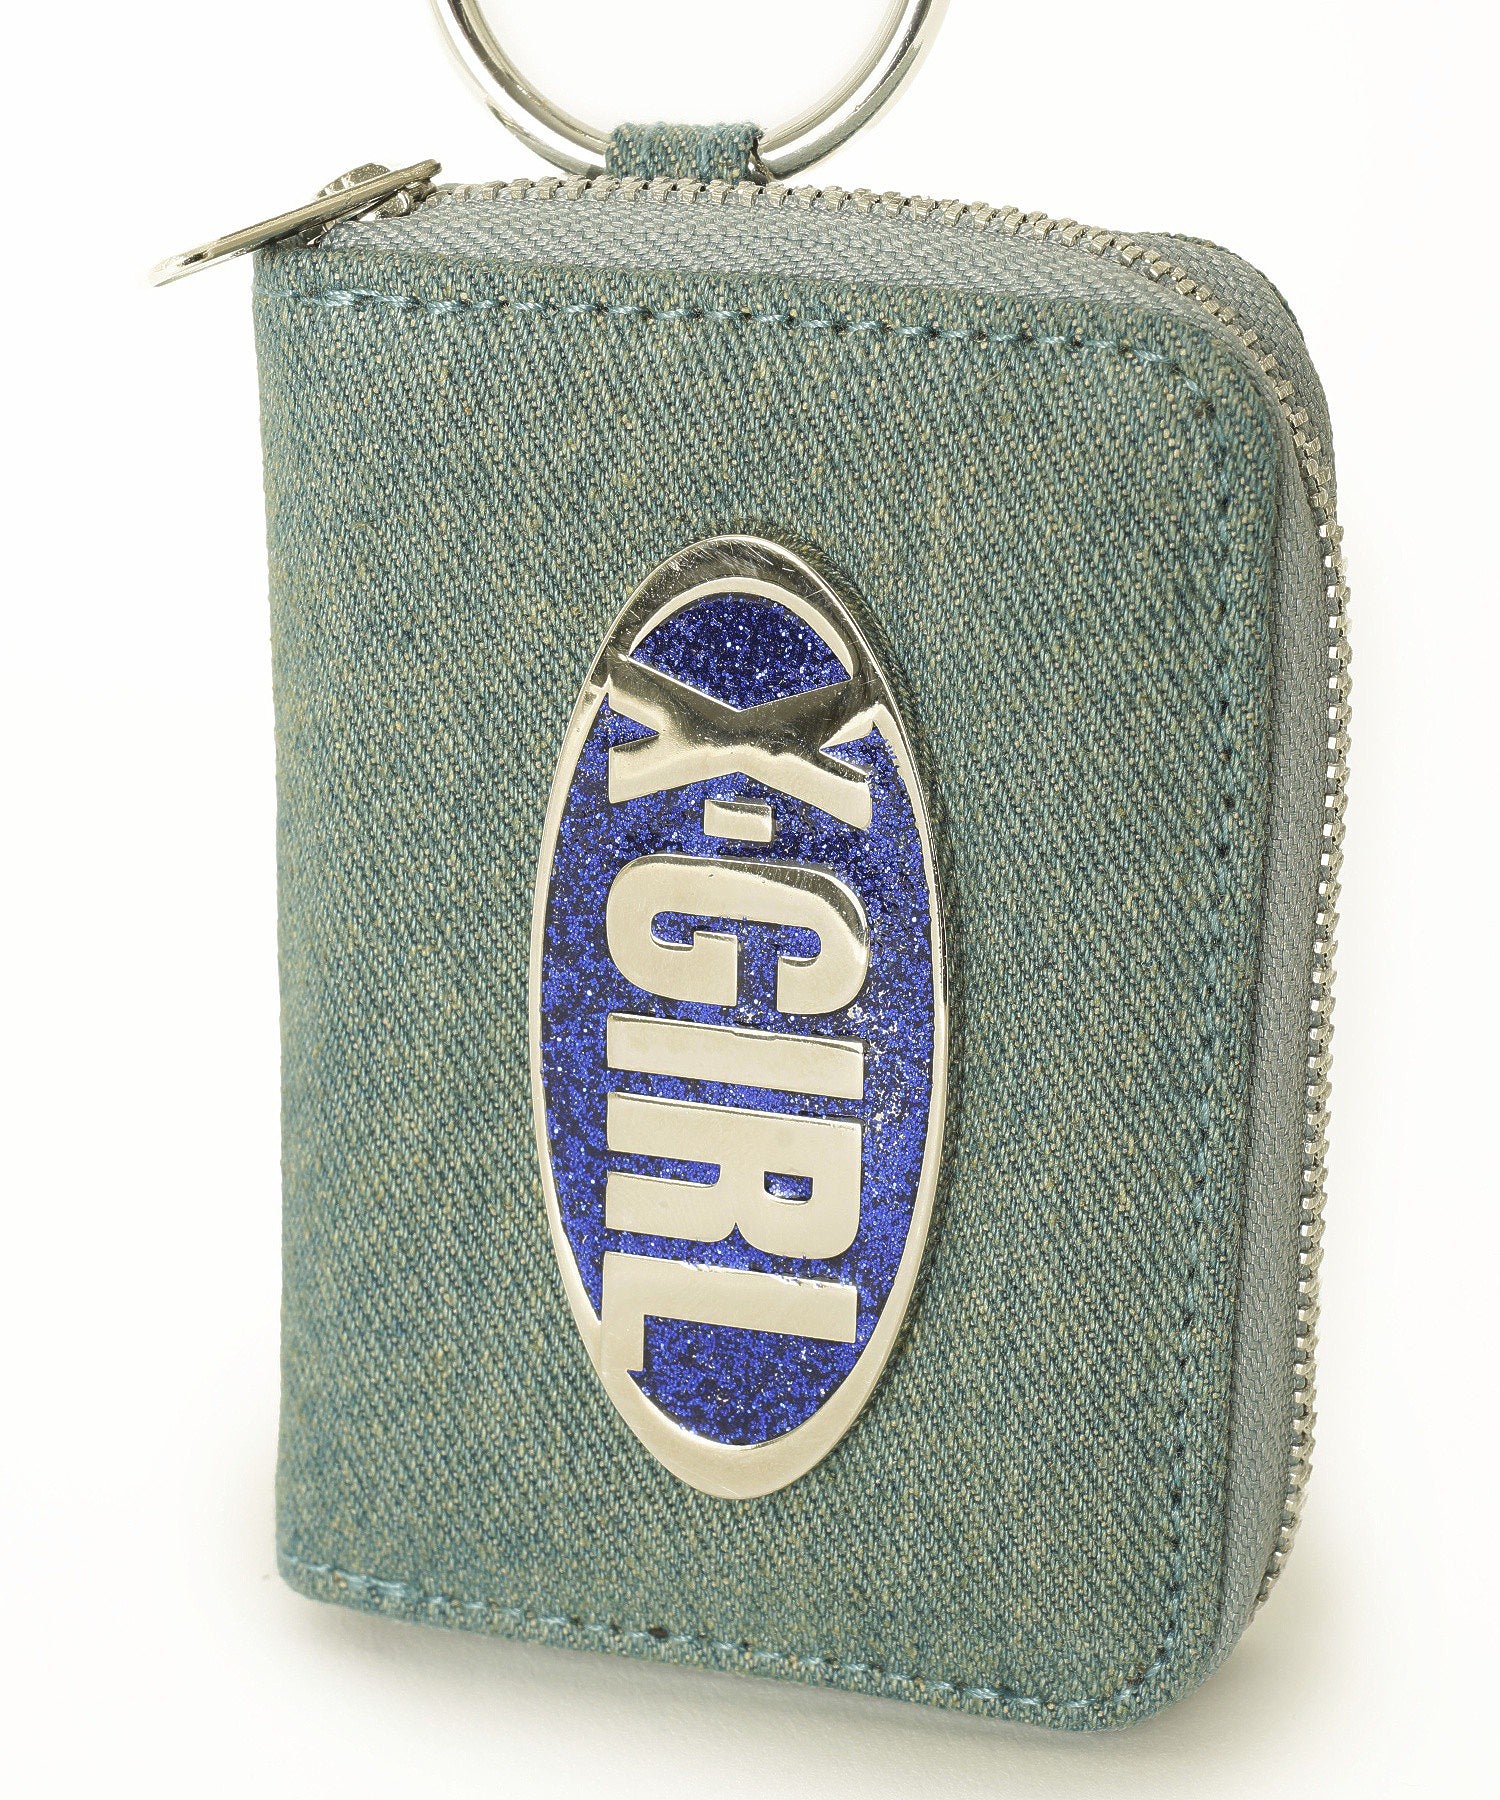 GLITTER OVAL LOGO COIN AND CARD CASE